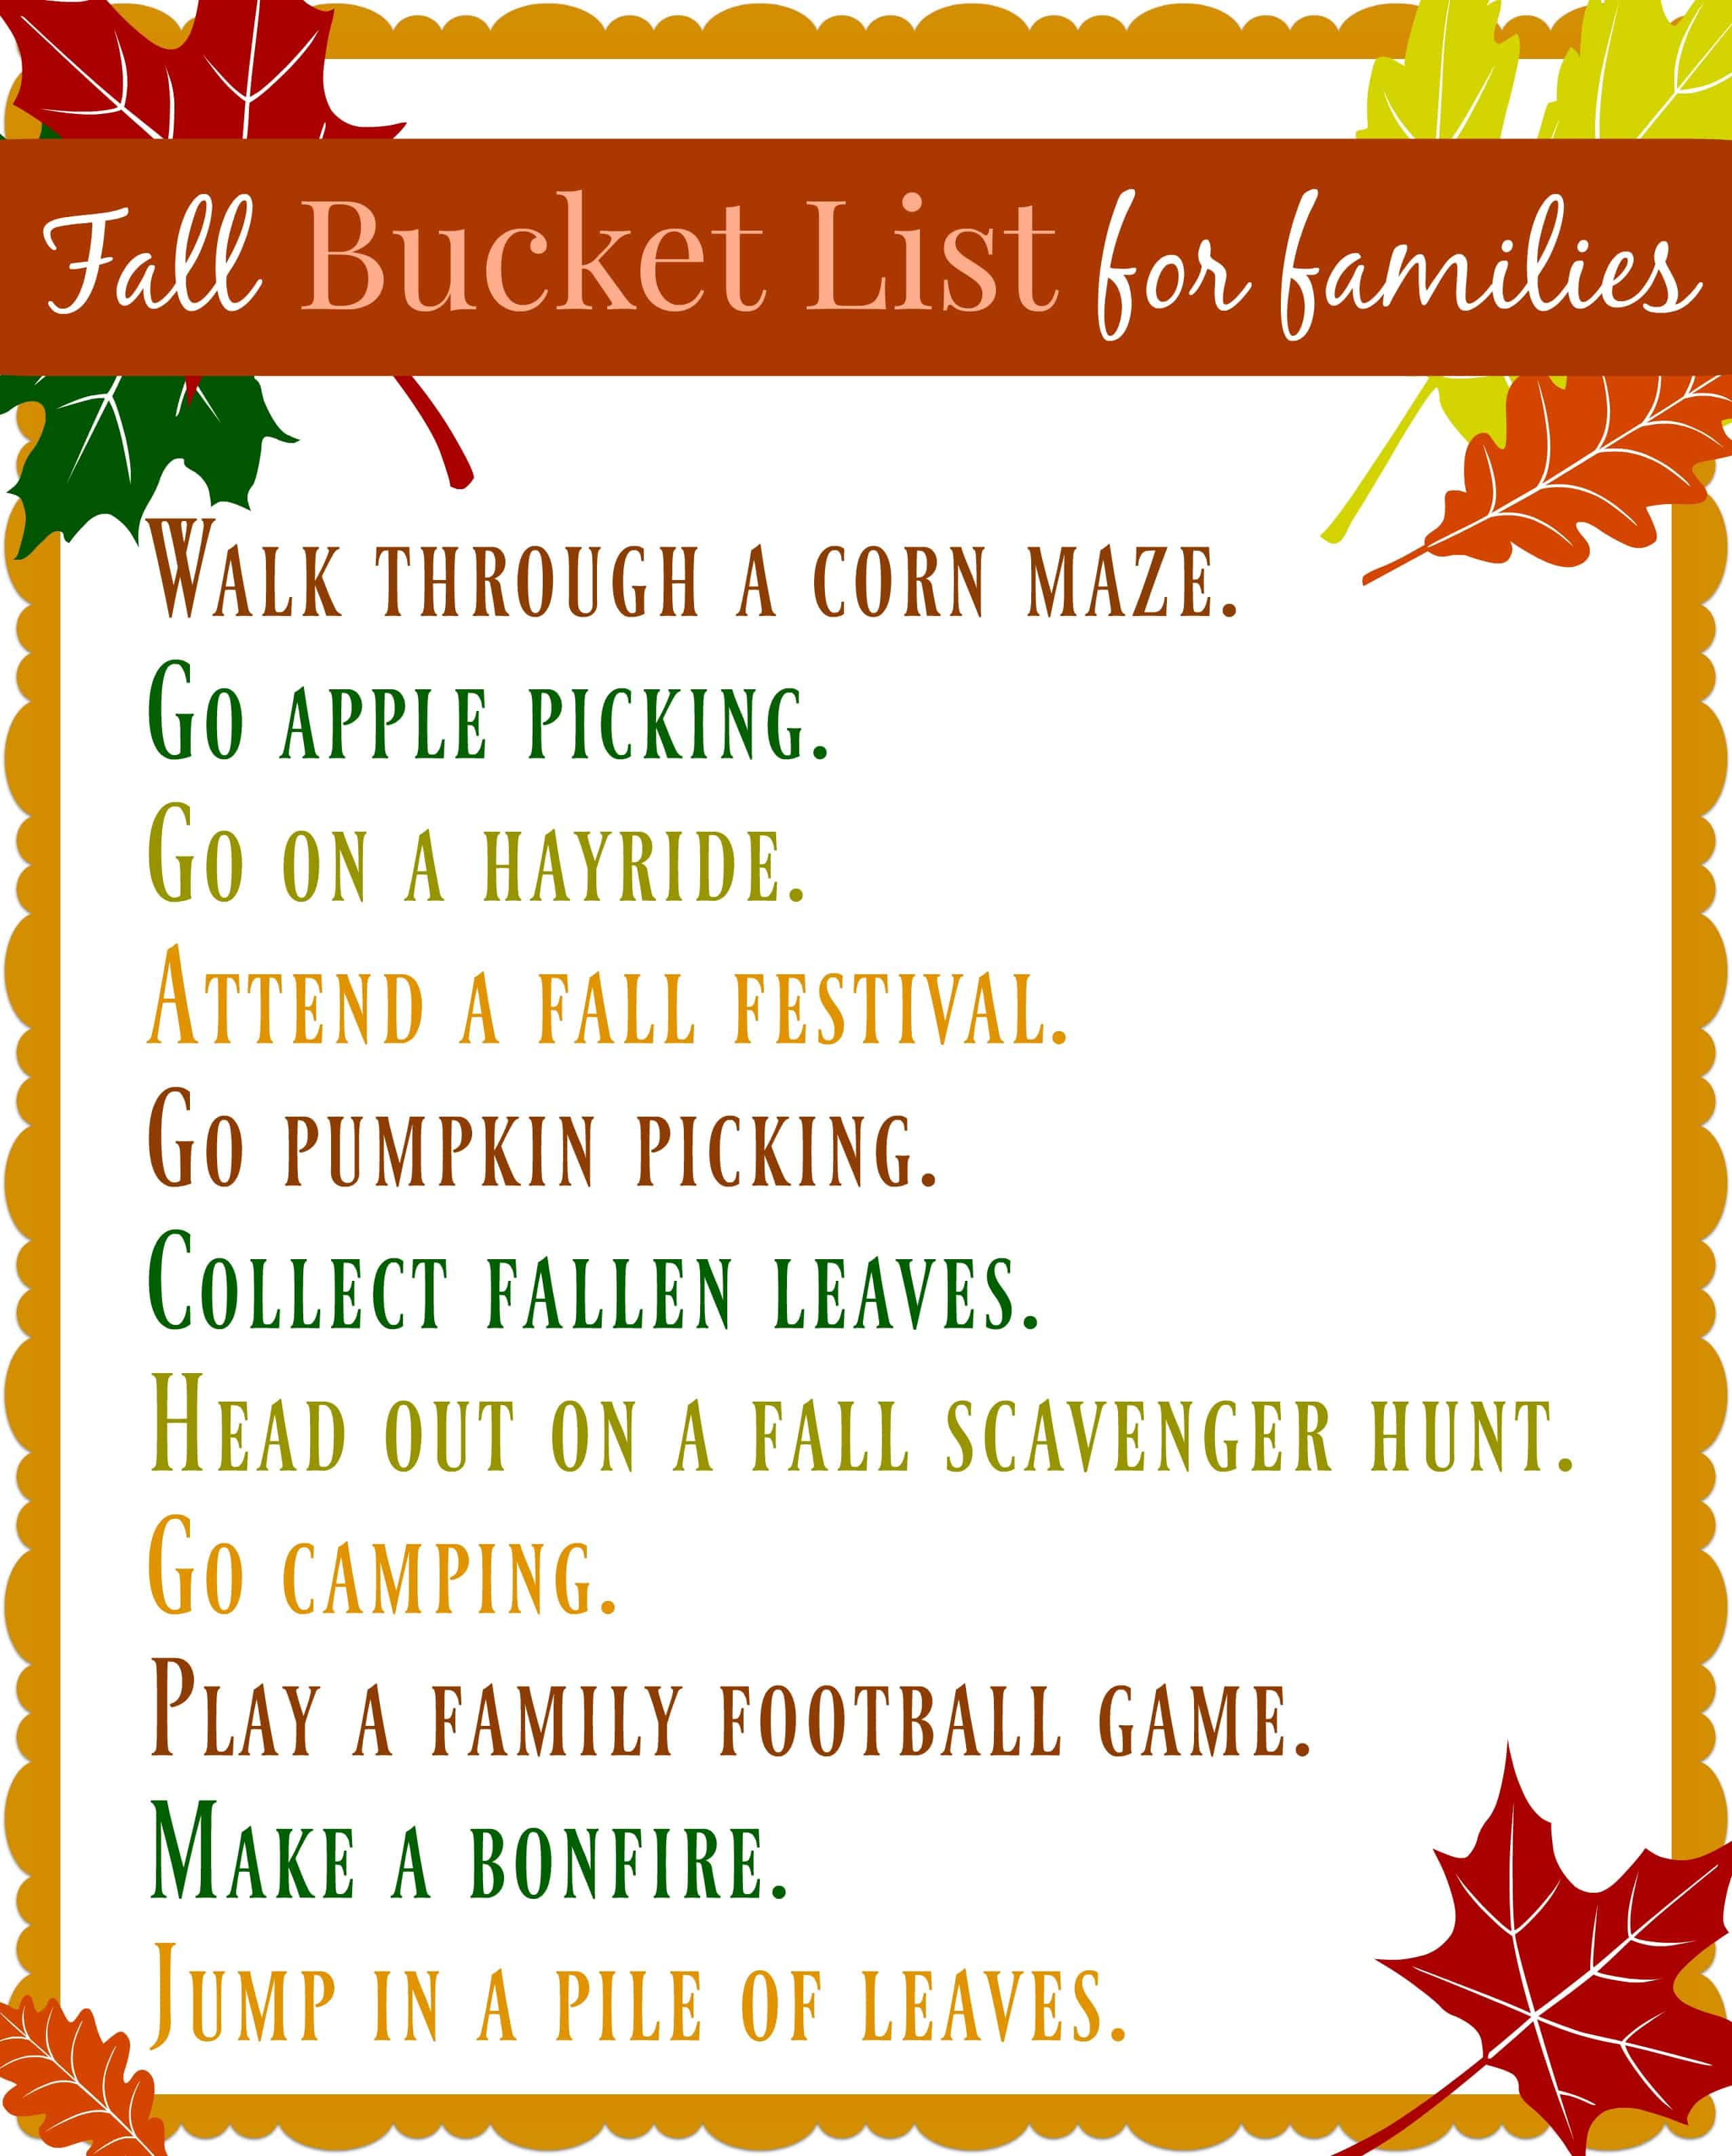 There are so many ways to get out as a family this fall! Check out this ultimate list of fun family activities that you MUST do this fall! 